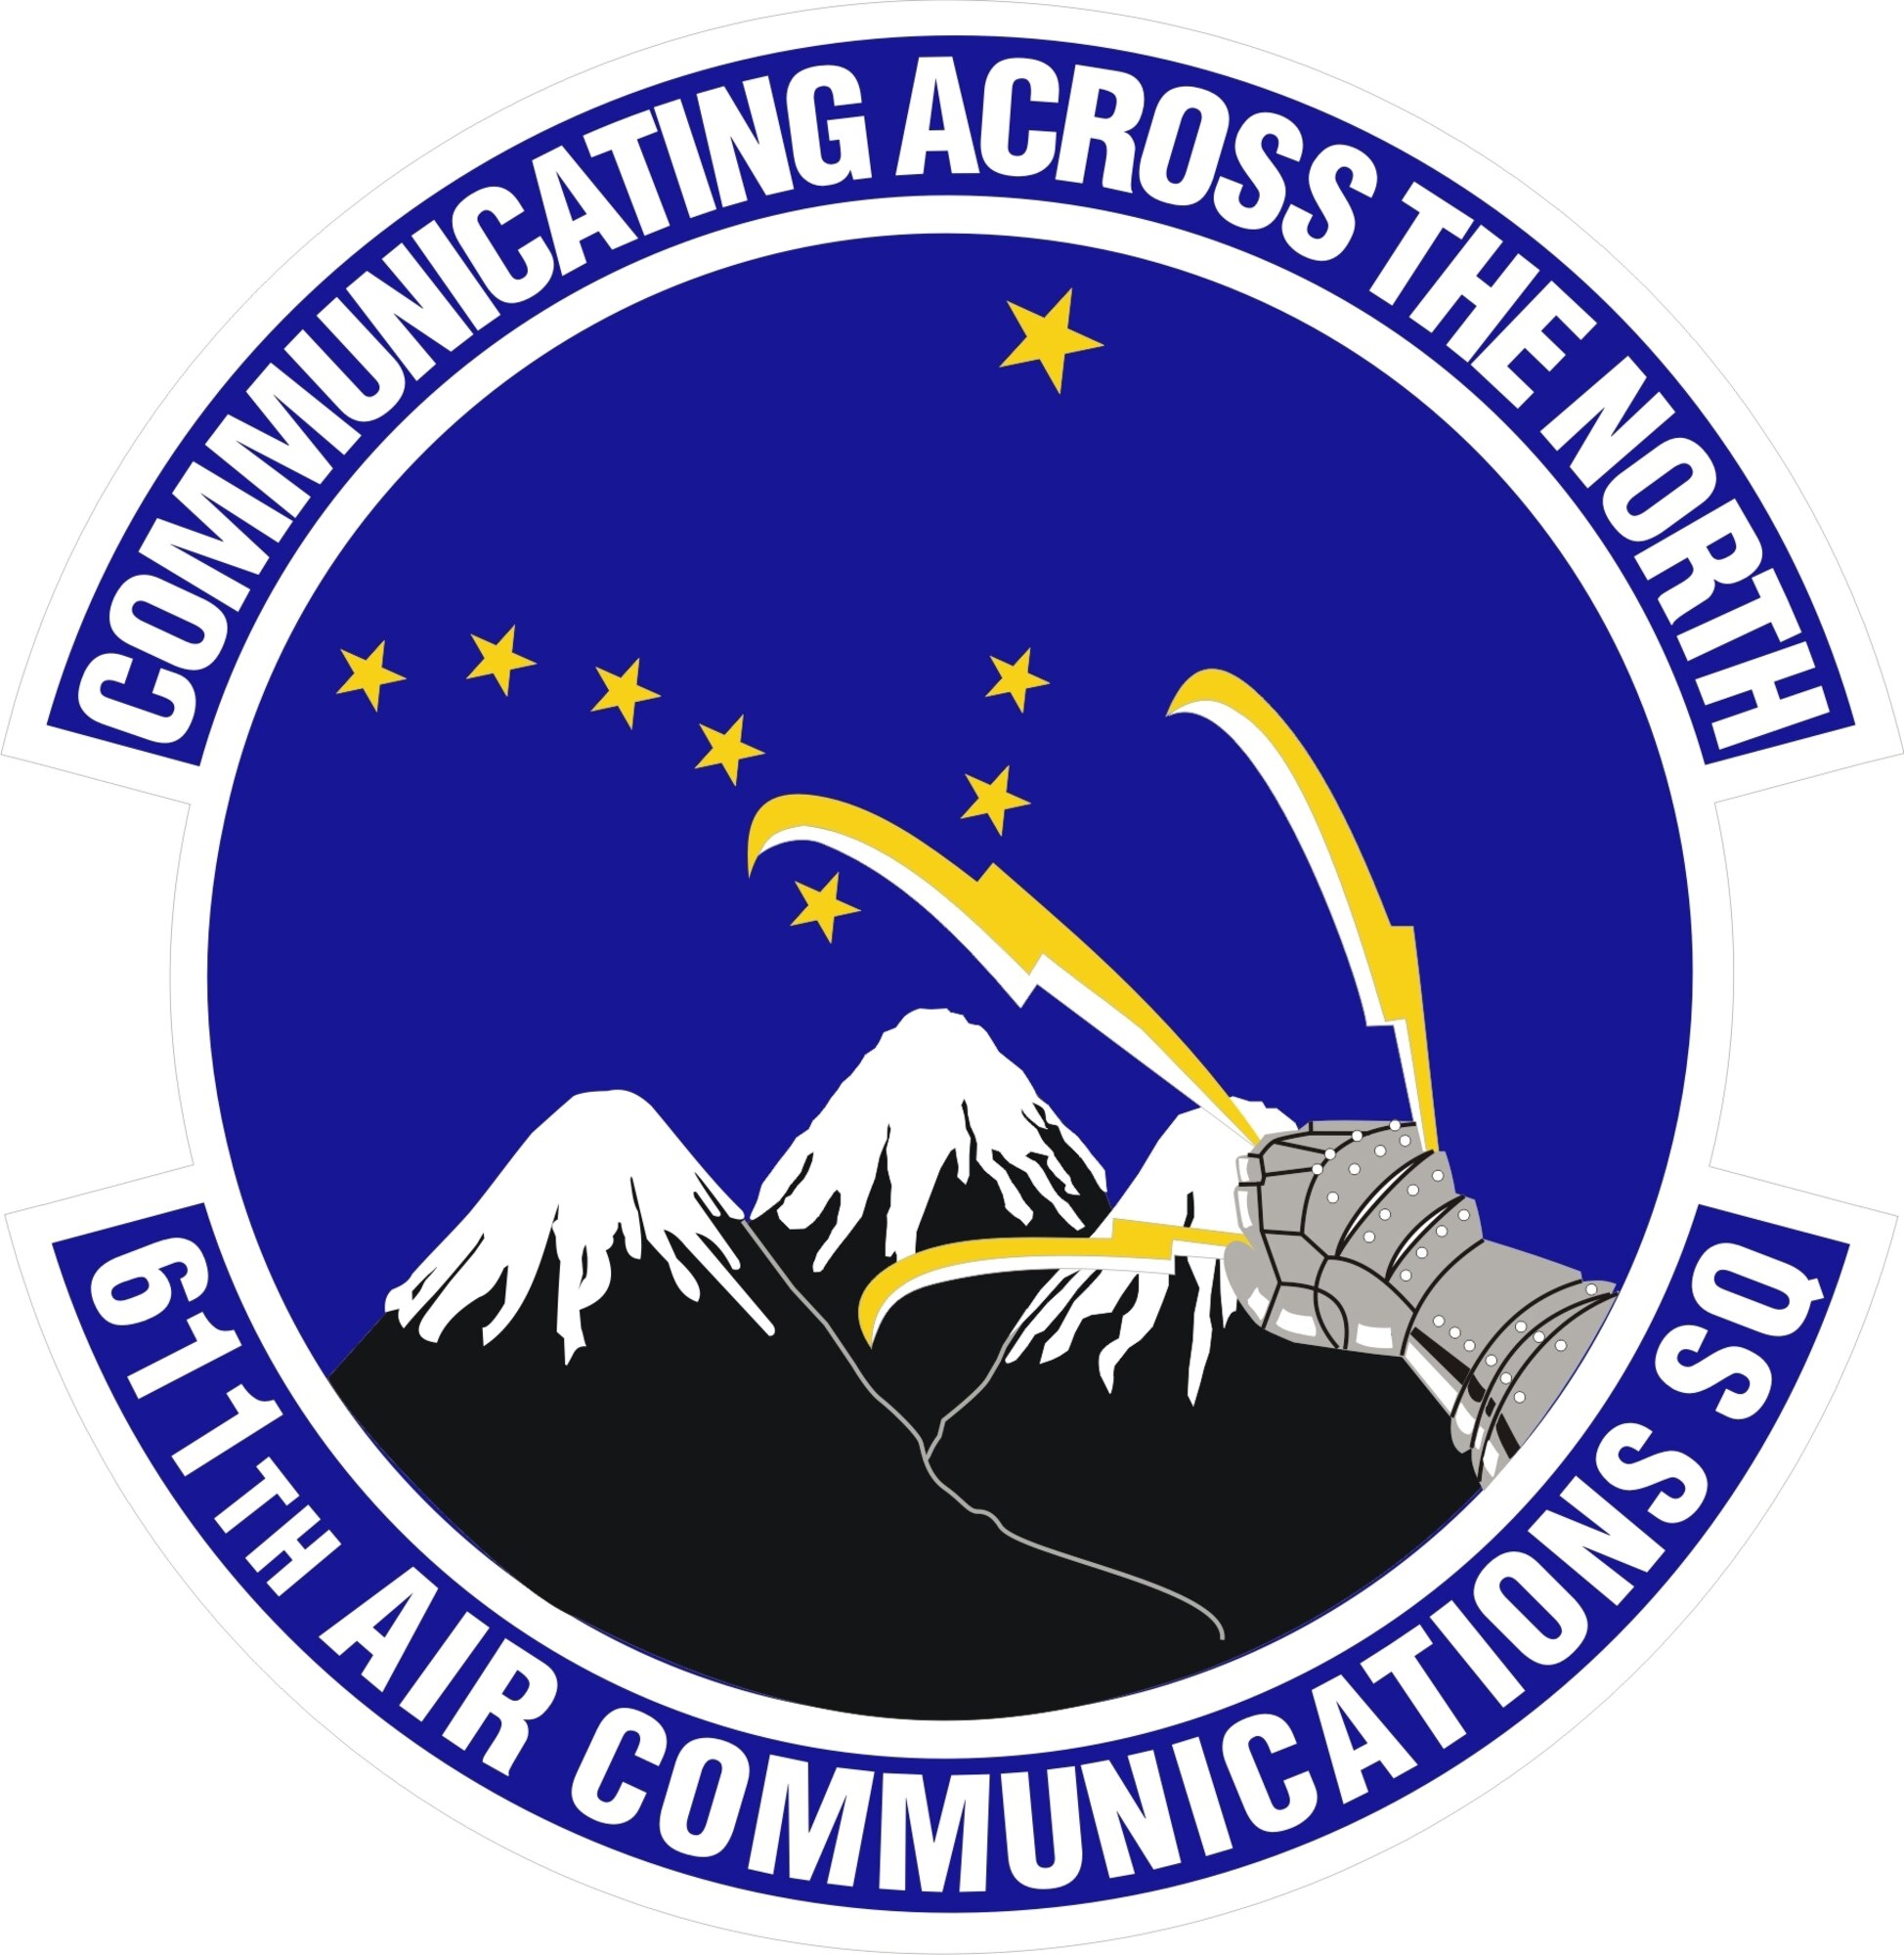 611th Air Communications Squadron (611th ACOMS) (U.S. Air Force graphic)